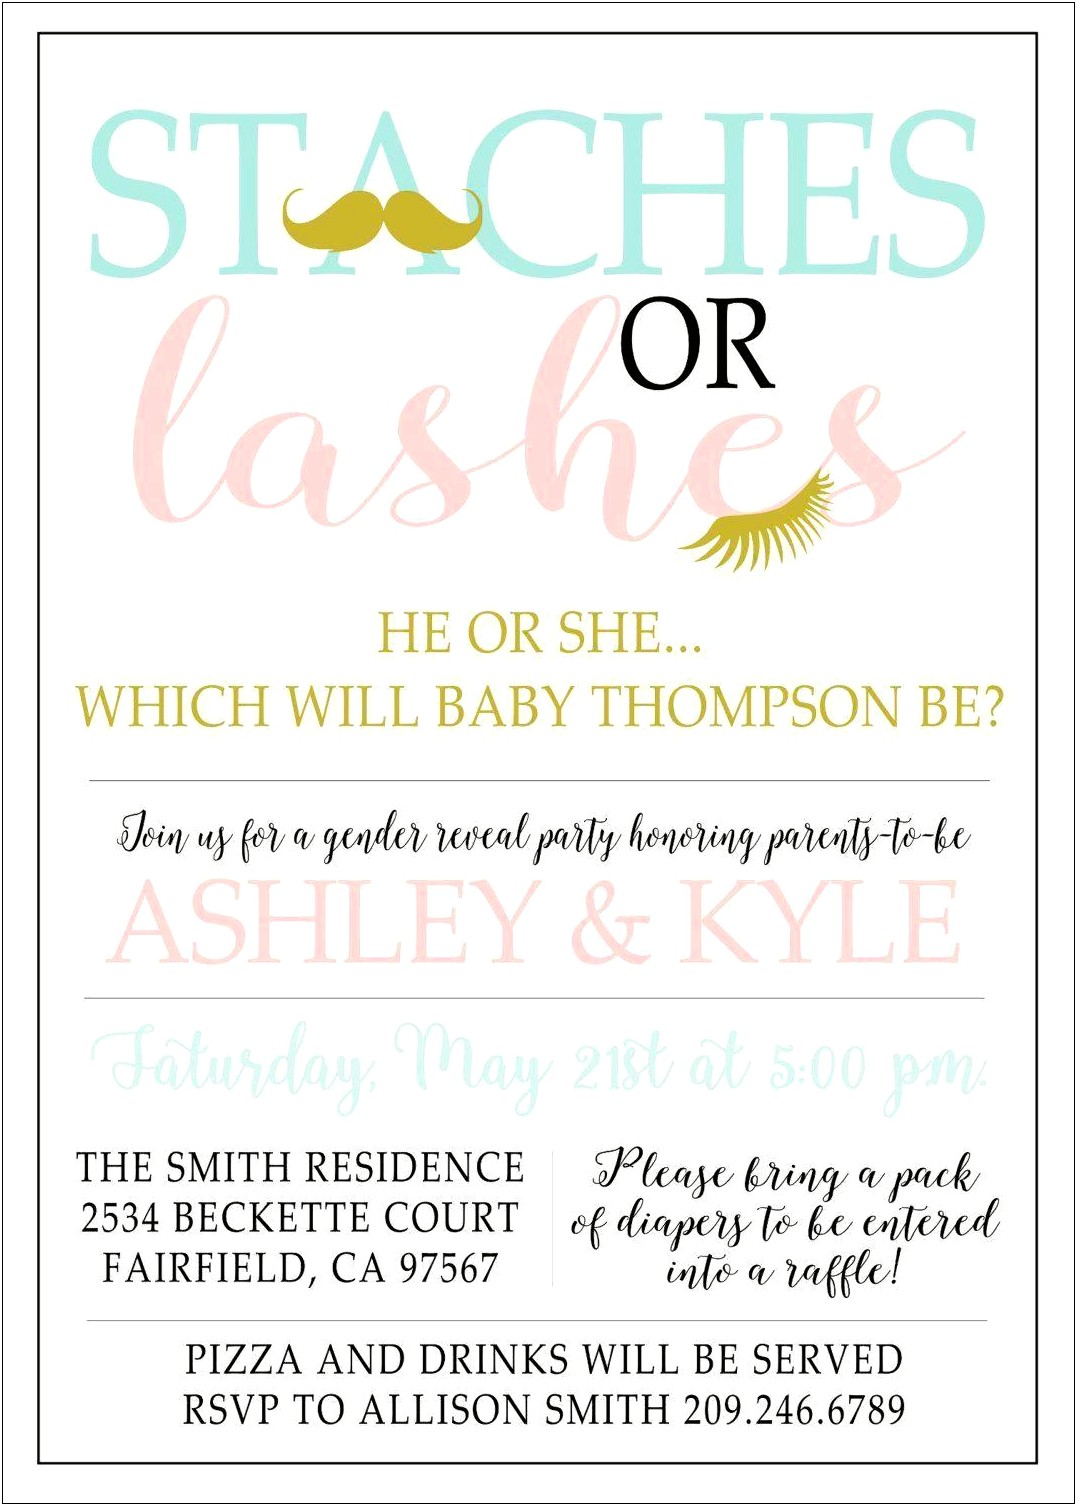 Staches Or Lashes Invitation Template Free